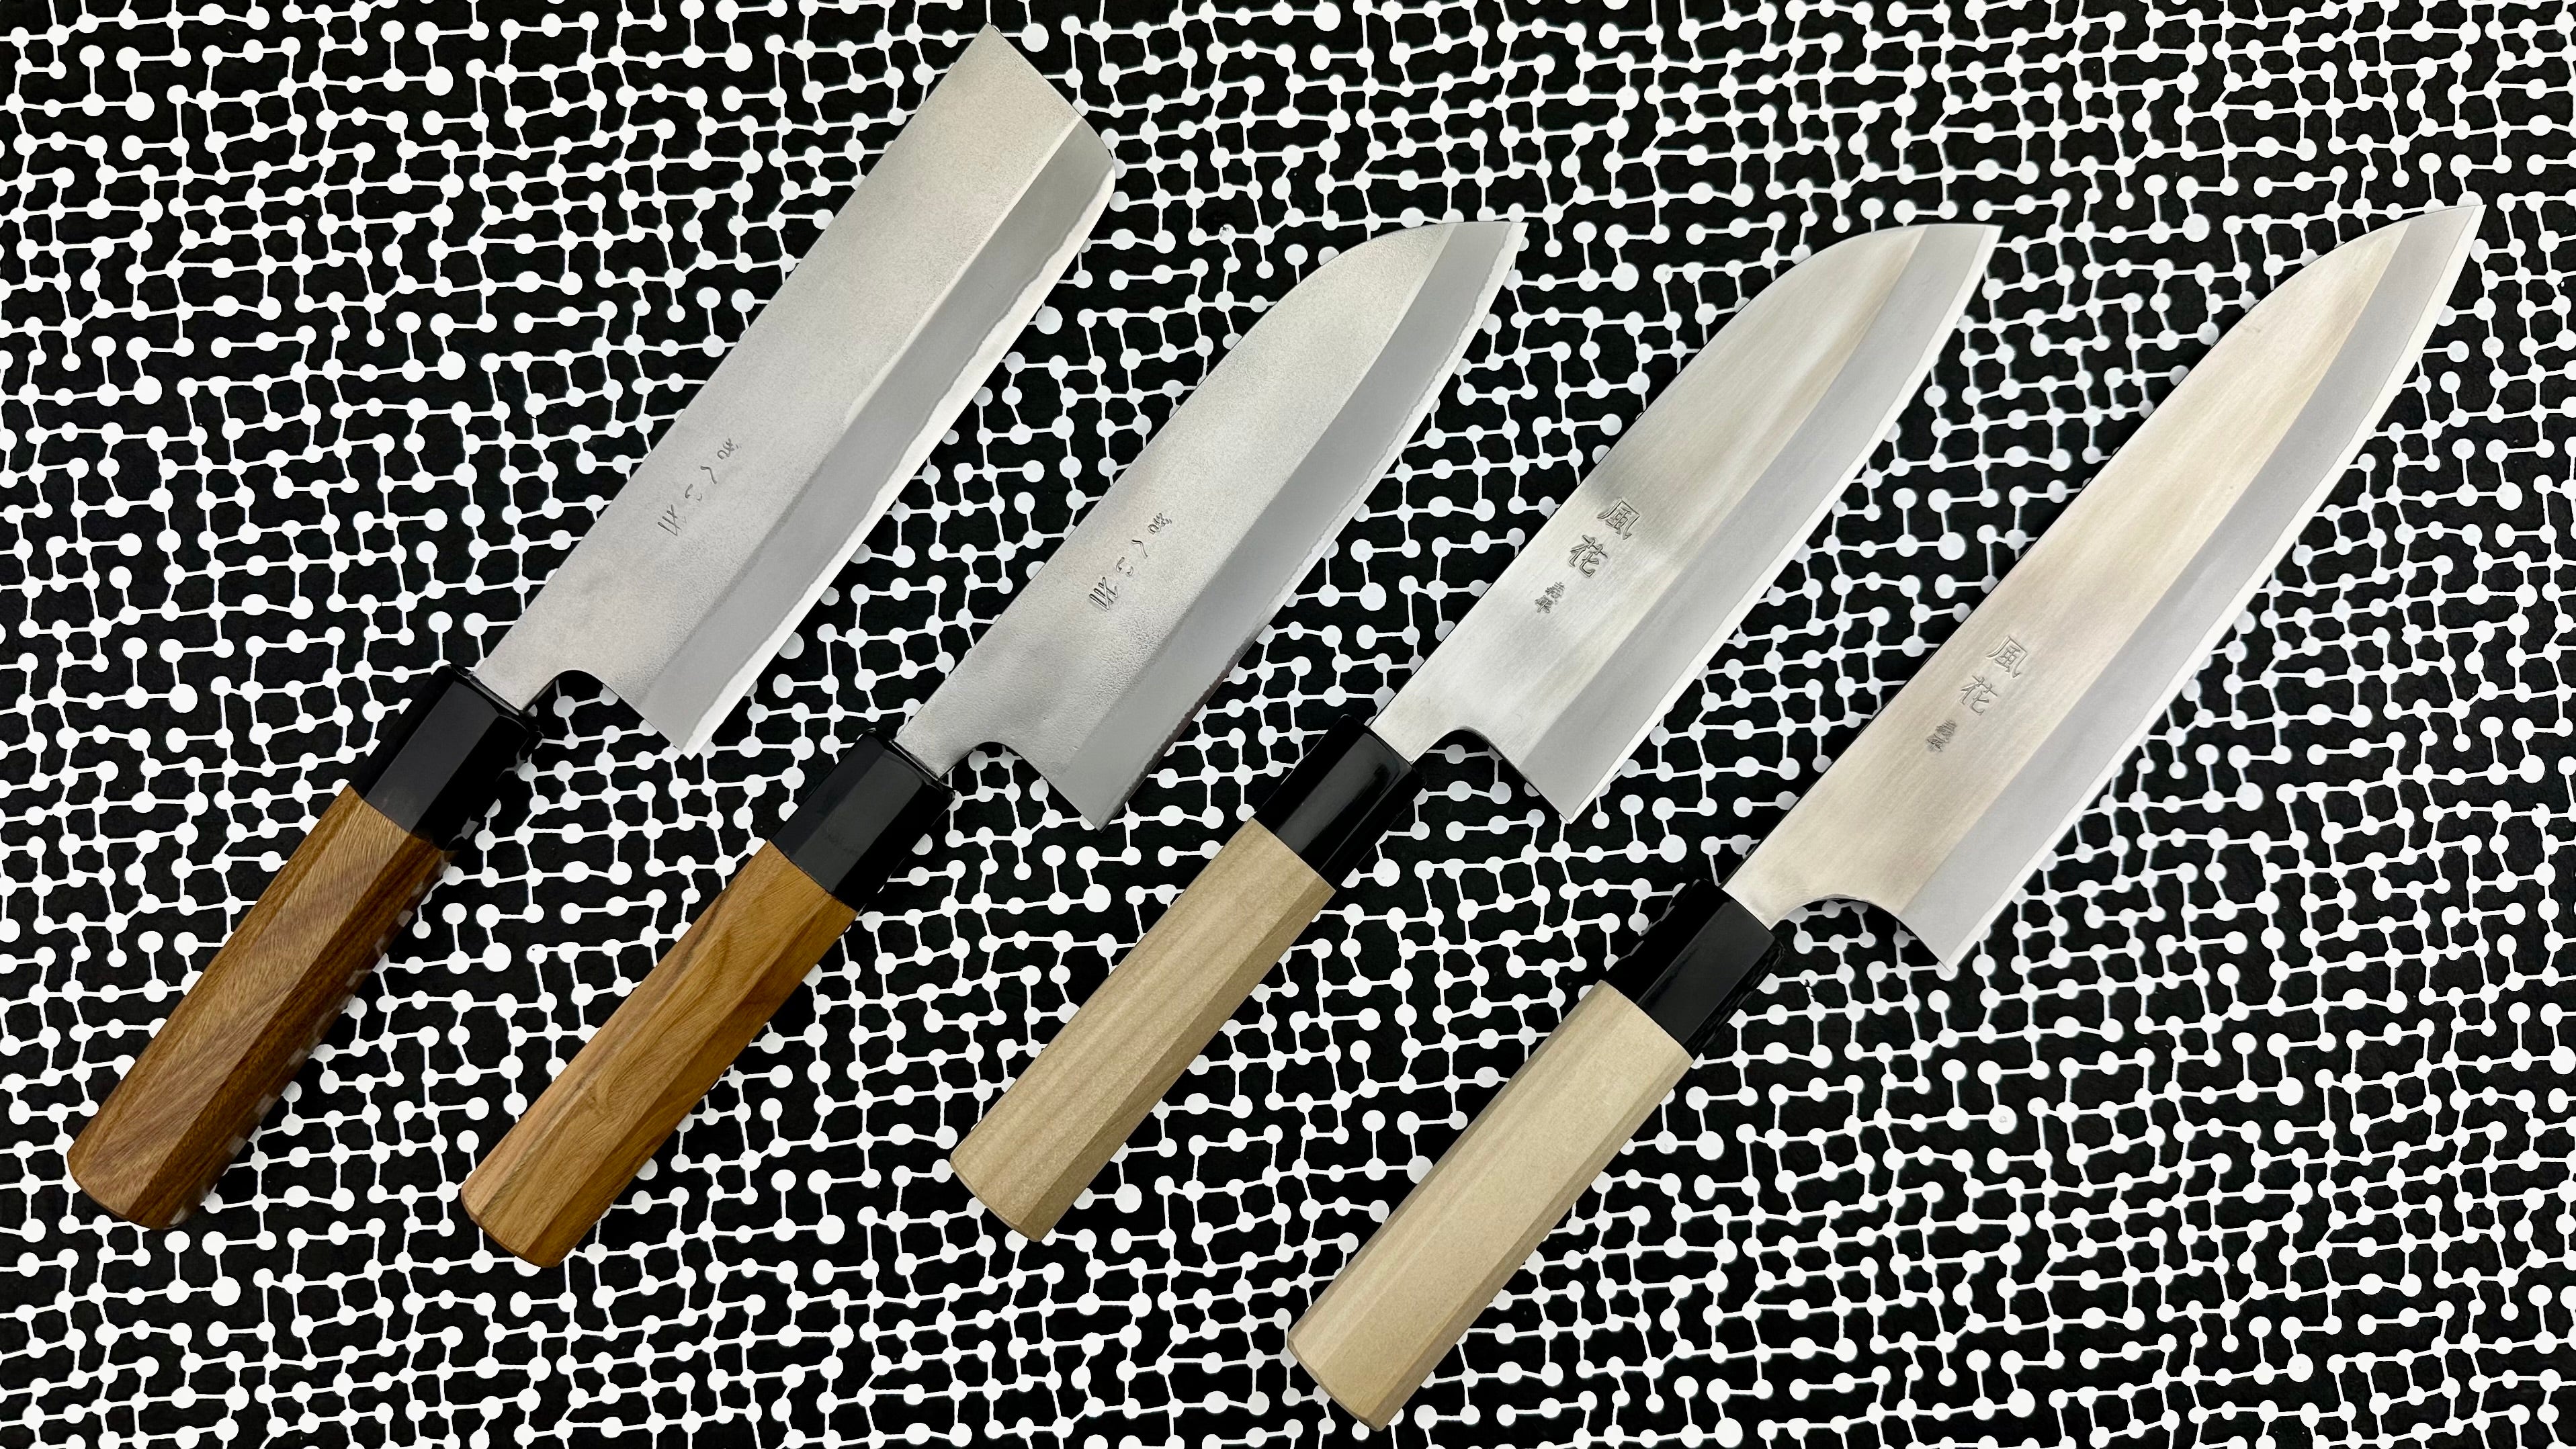 What Makes Japanese Kitchen Knives so Awesome?  Knifewear - Handcrafted Japanese  Kitchen Knives